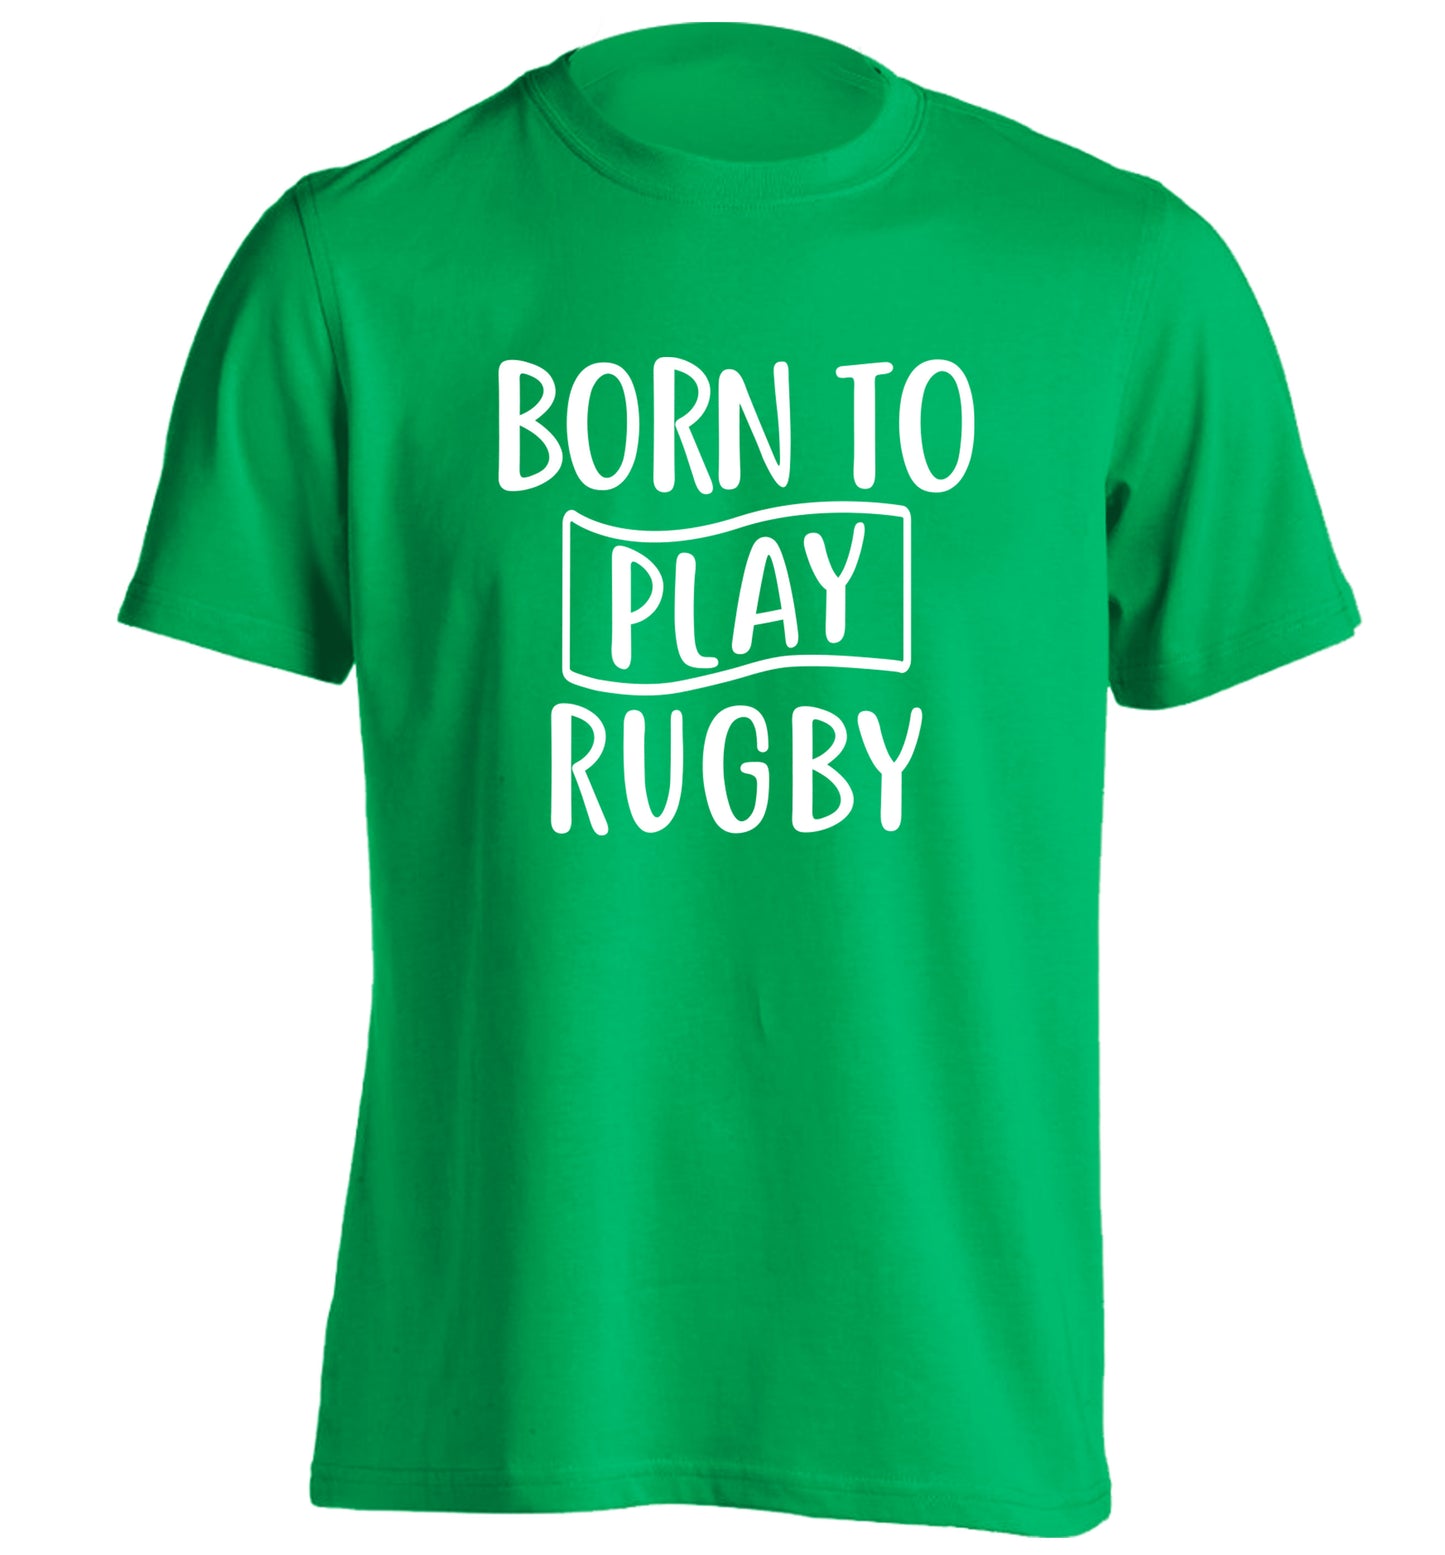 Born to play rugby adults unisex green Tshirt 2XL